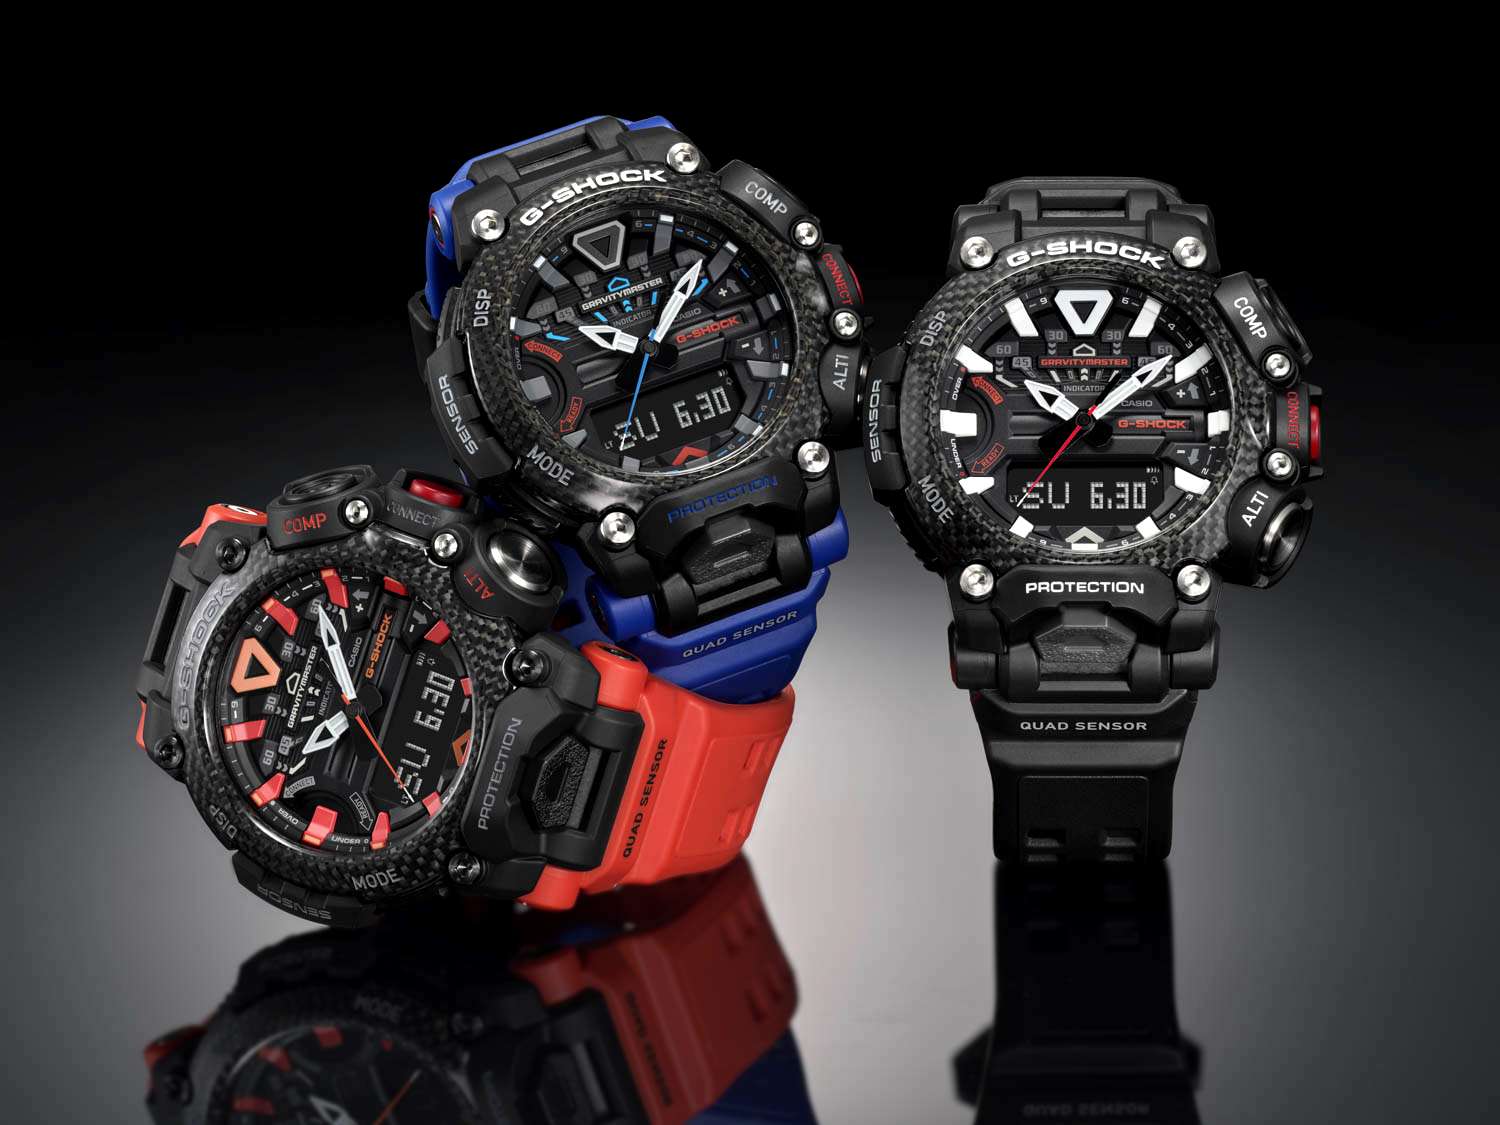 Introducing the G-Shock Gravitymaster GRB200